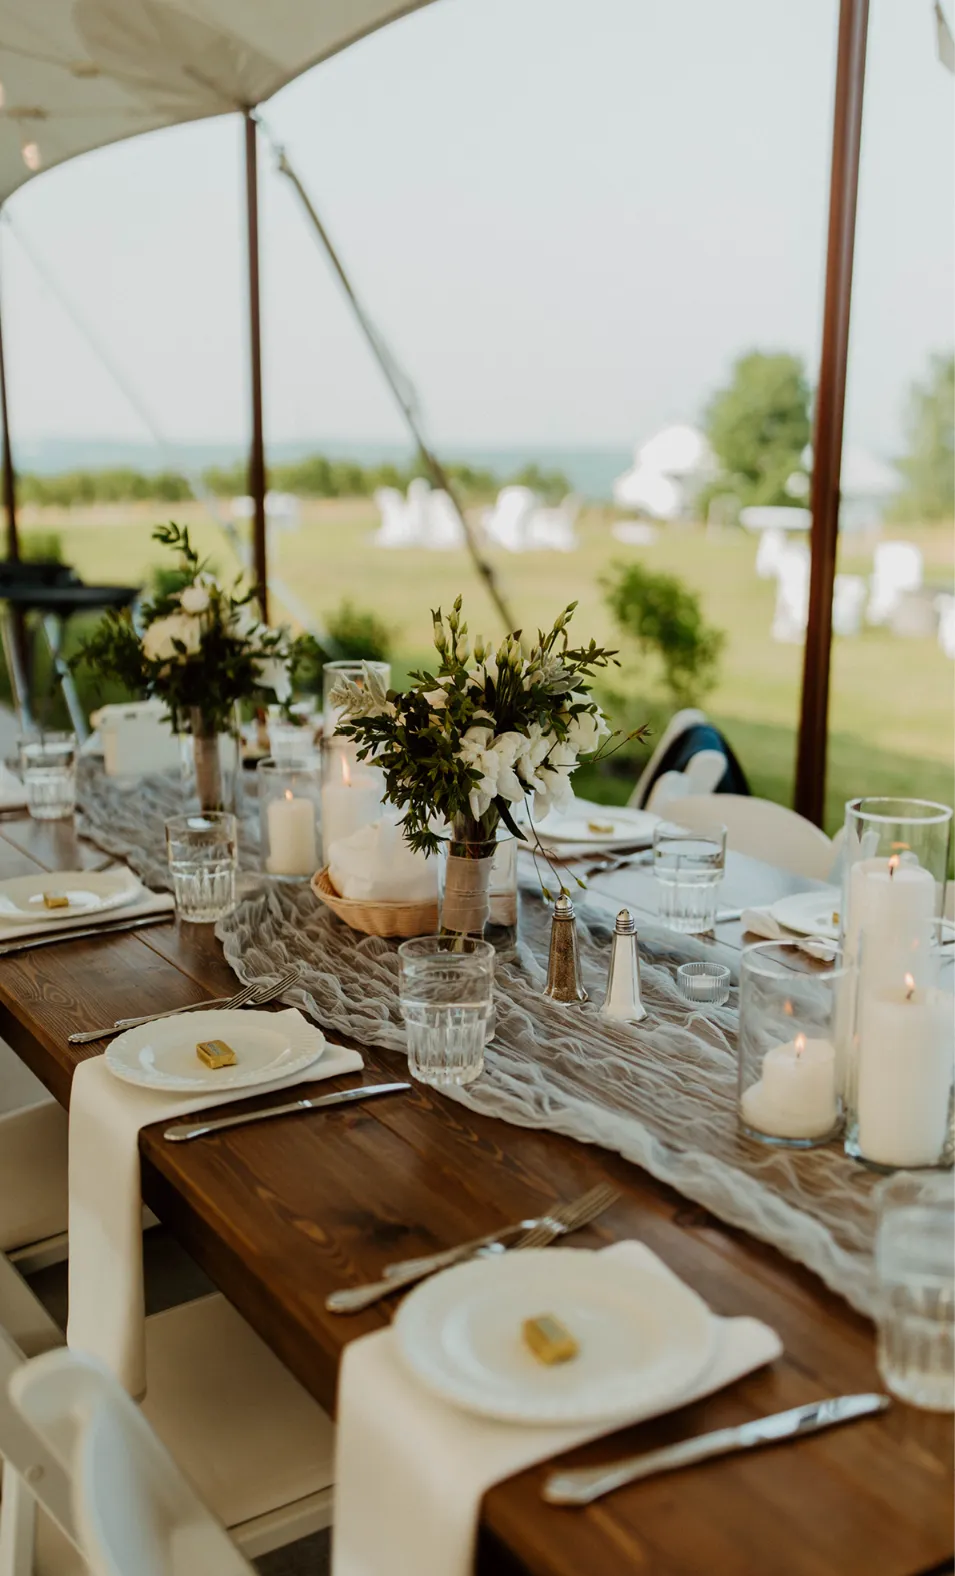 Outdoor table settings on a table